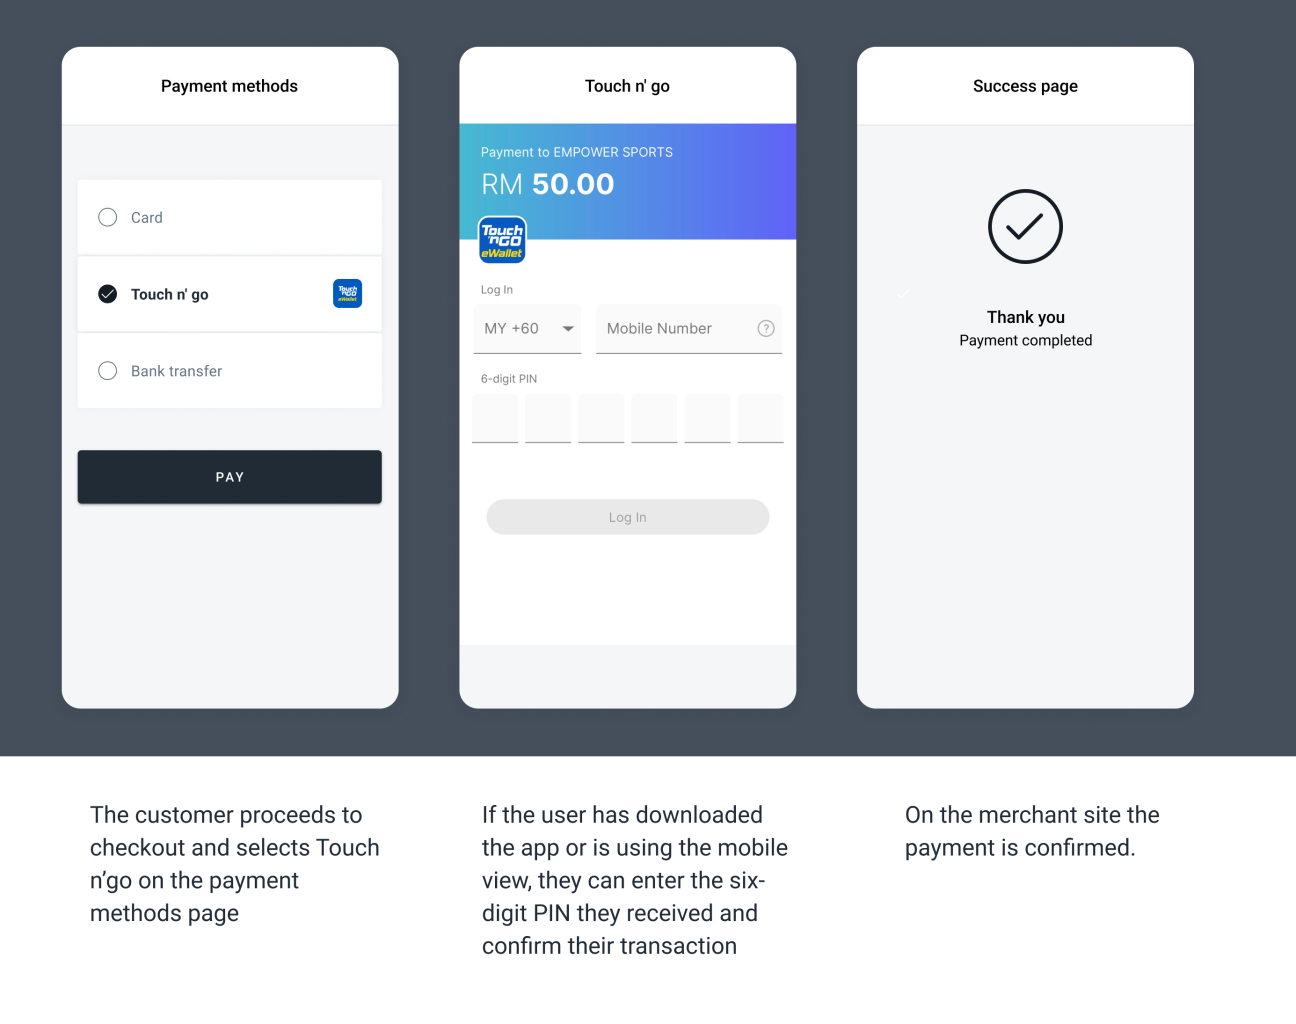 The screenshots illustrate a generic Touch 'n go wallet redirect flow.